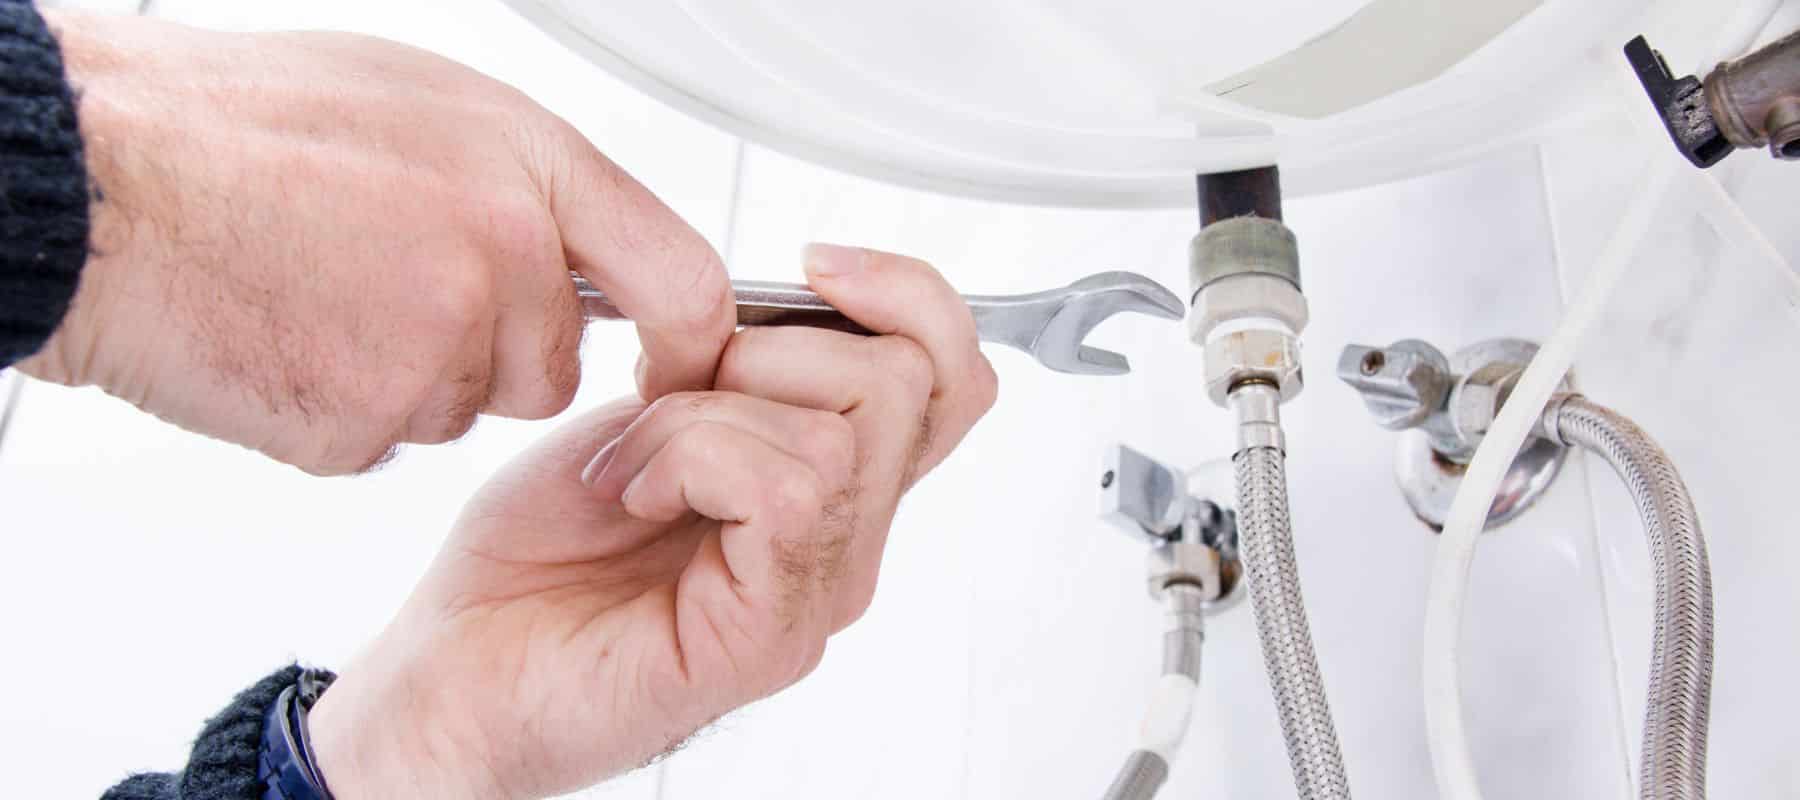 plumber using a handheld wrench to tighten a small fitting